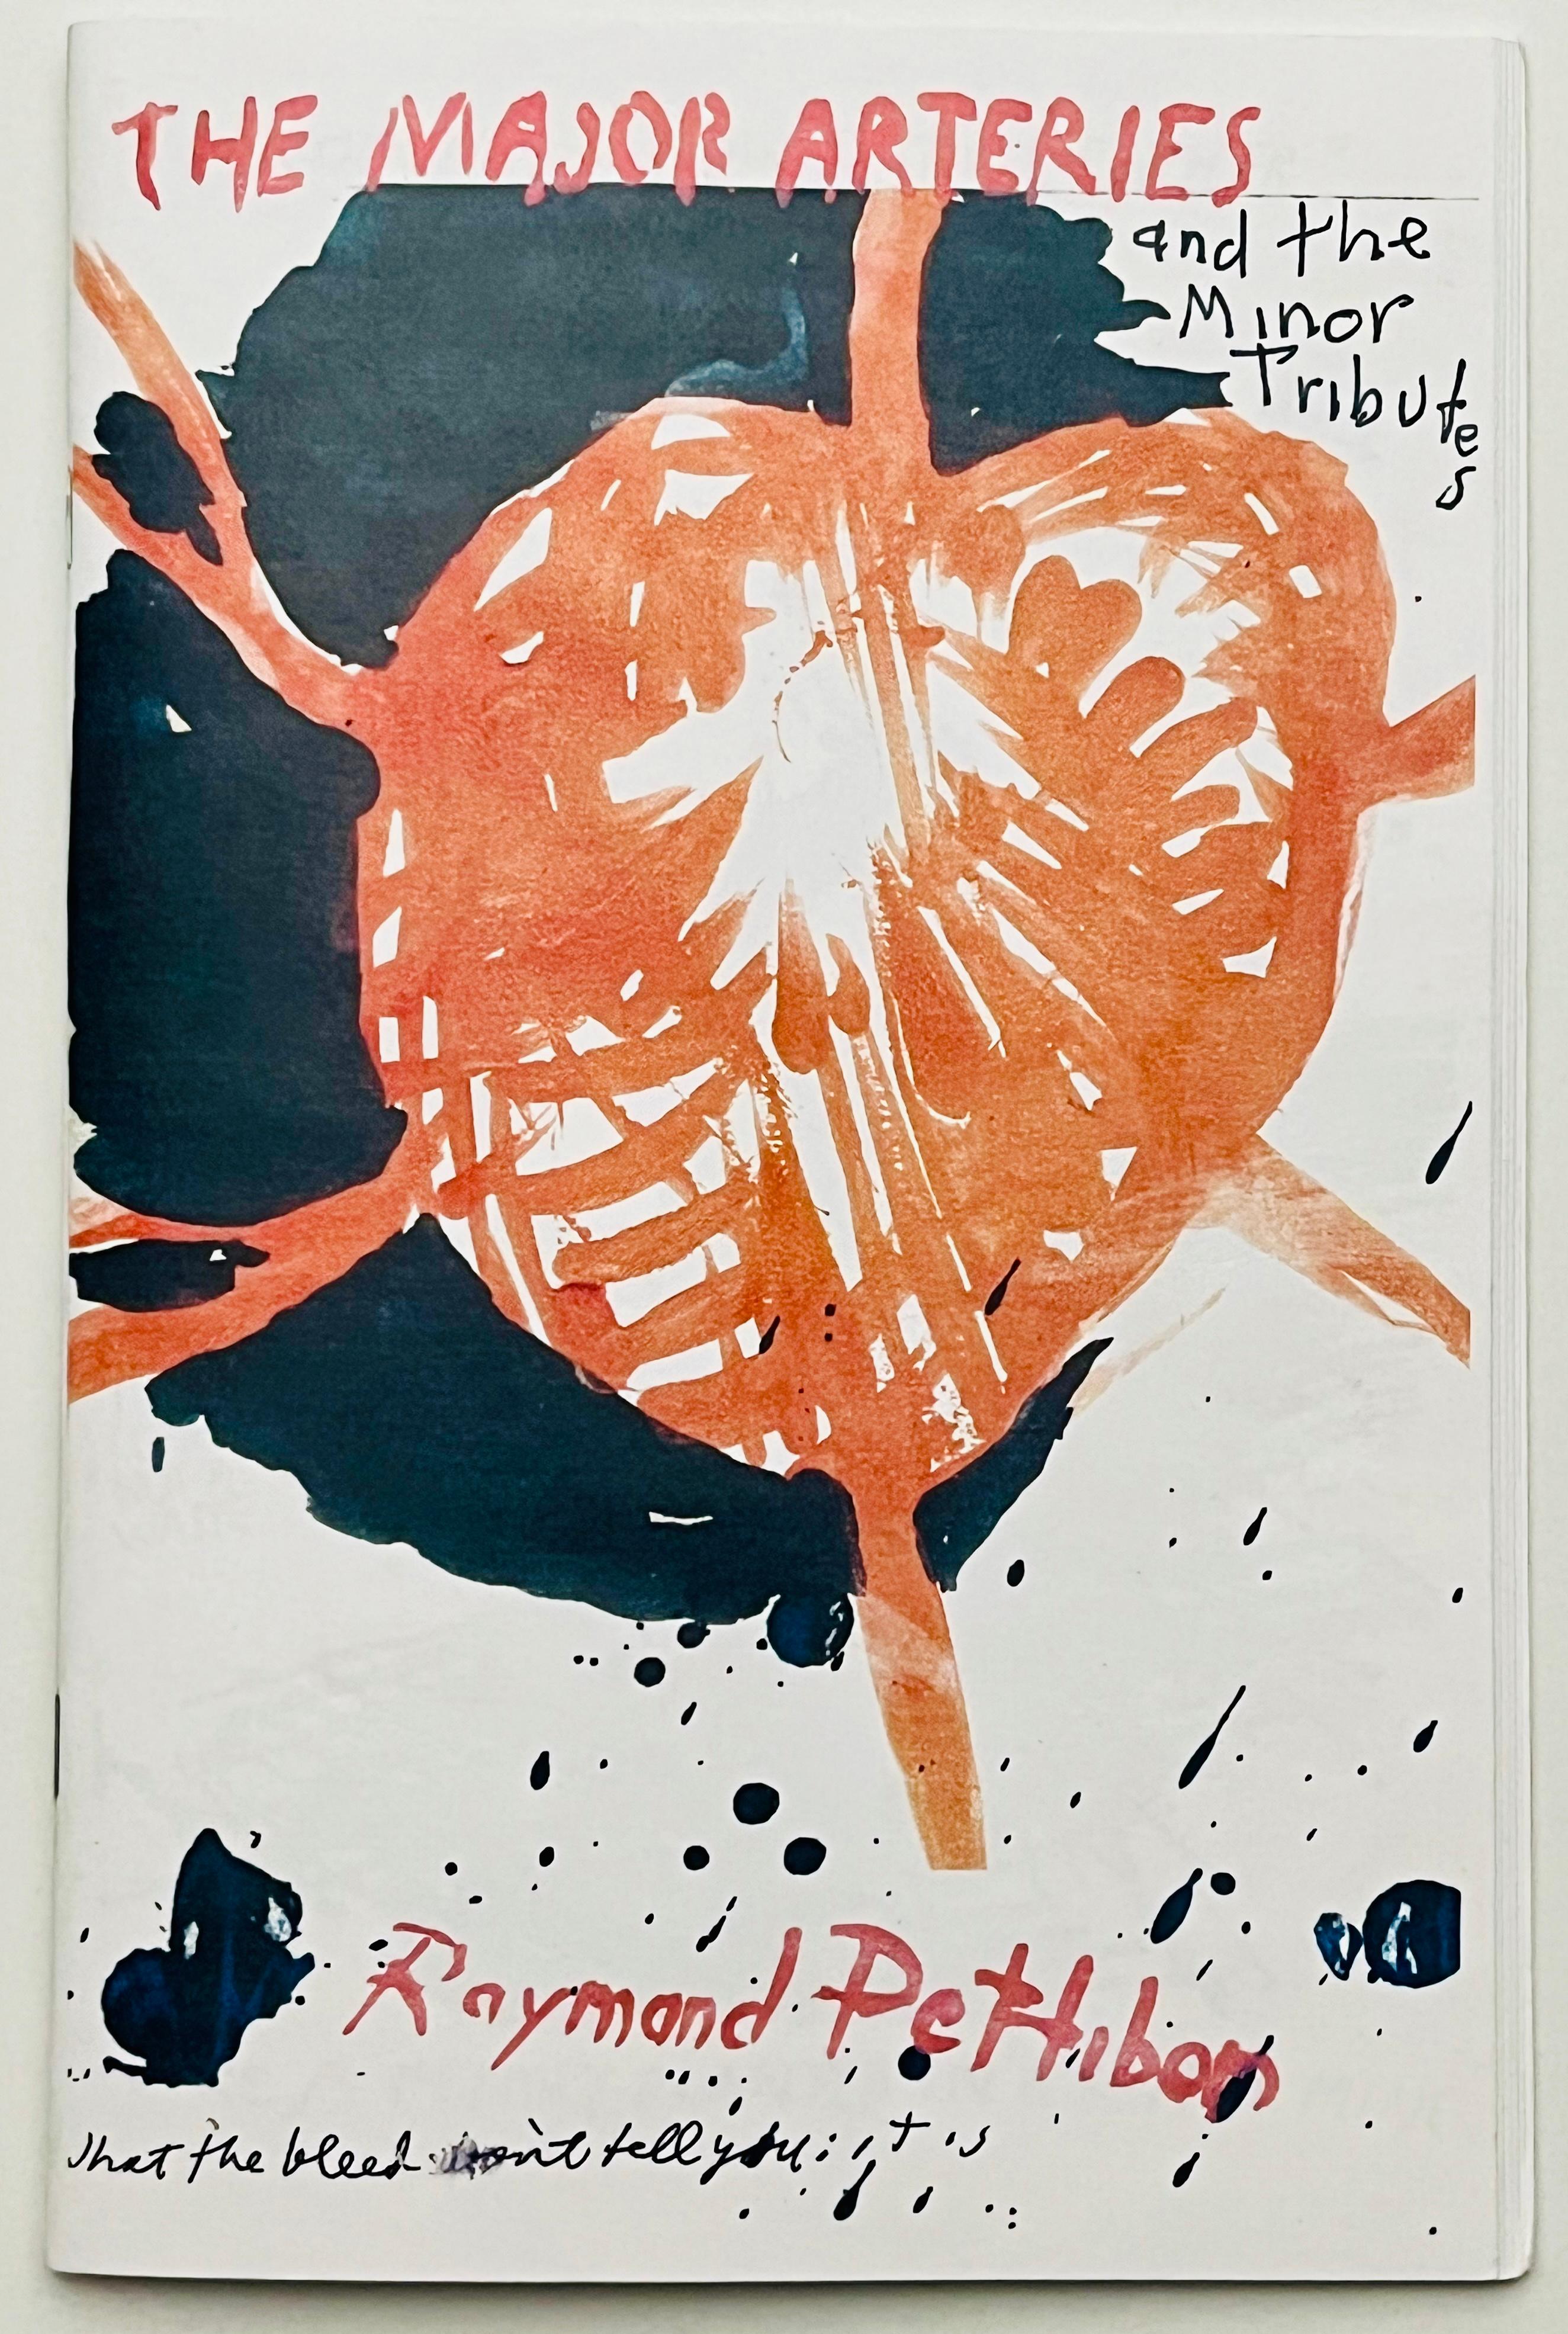 Raymond Pettibon The Major Arteries 2009 (Raymond Pettibon zine):
This visually enticing 2009 Raymond Pettibon artist book/zine includes 30+ evocative drawings. Pettibon’s subjects are the stars of old films, dominatrices, and lovers in thigh-high